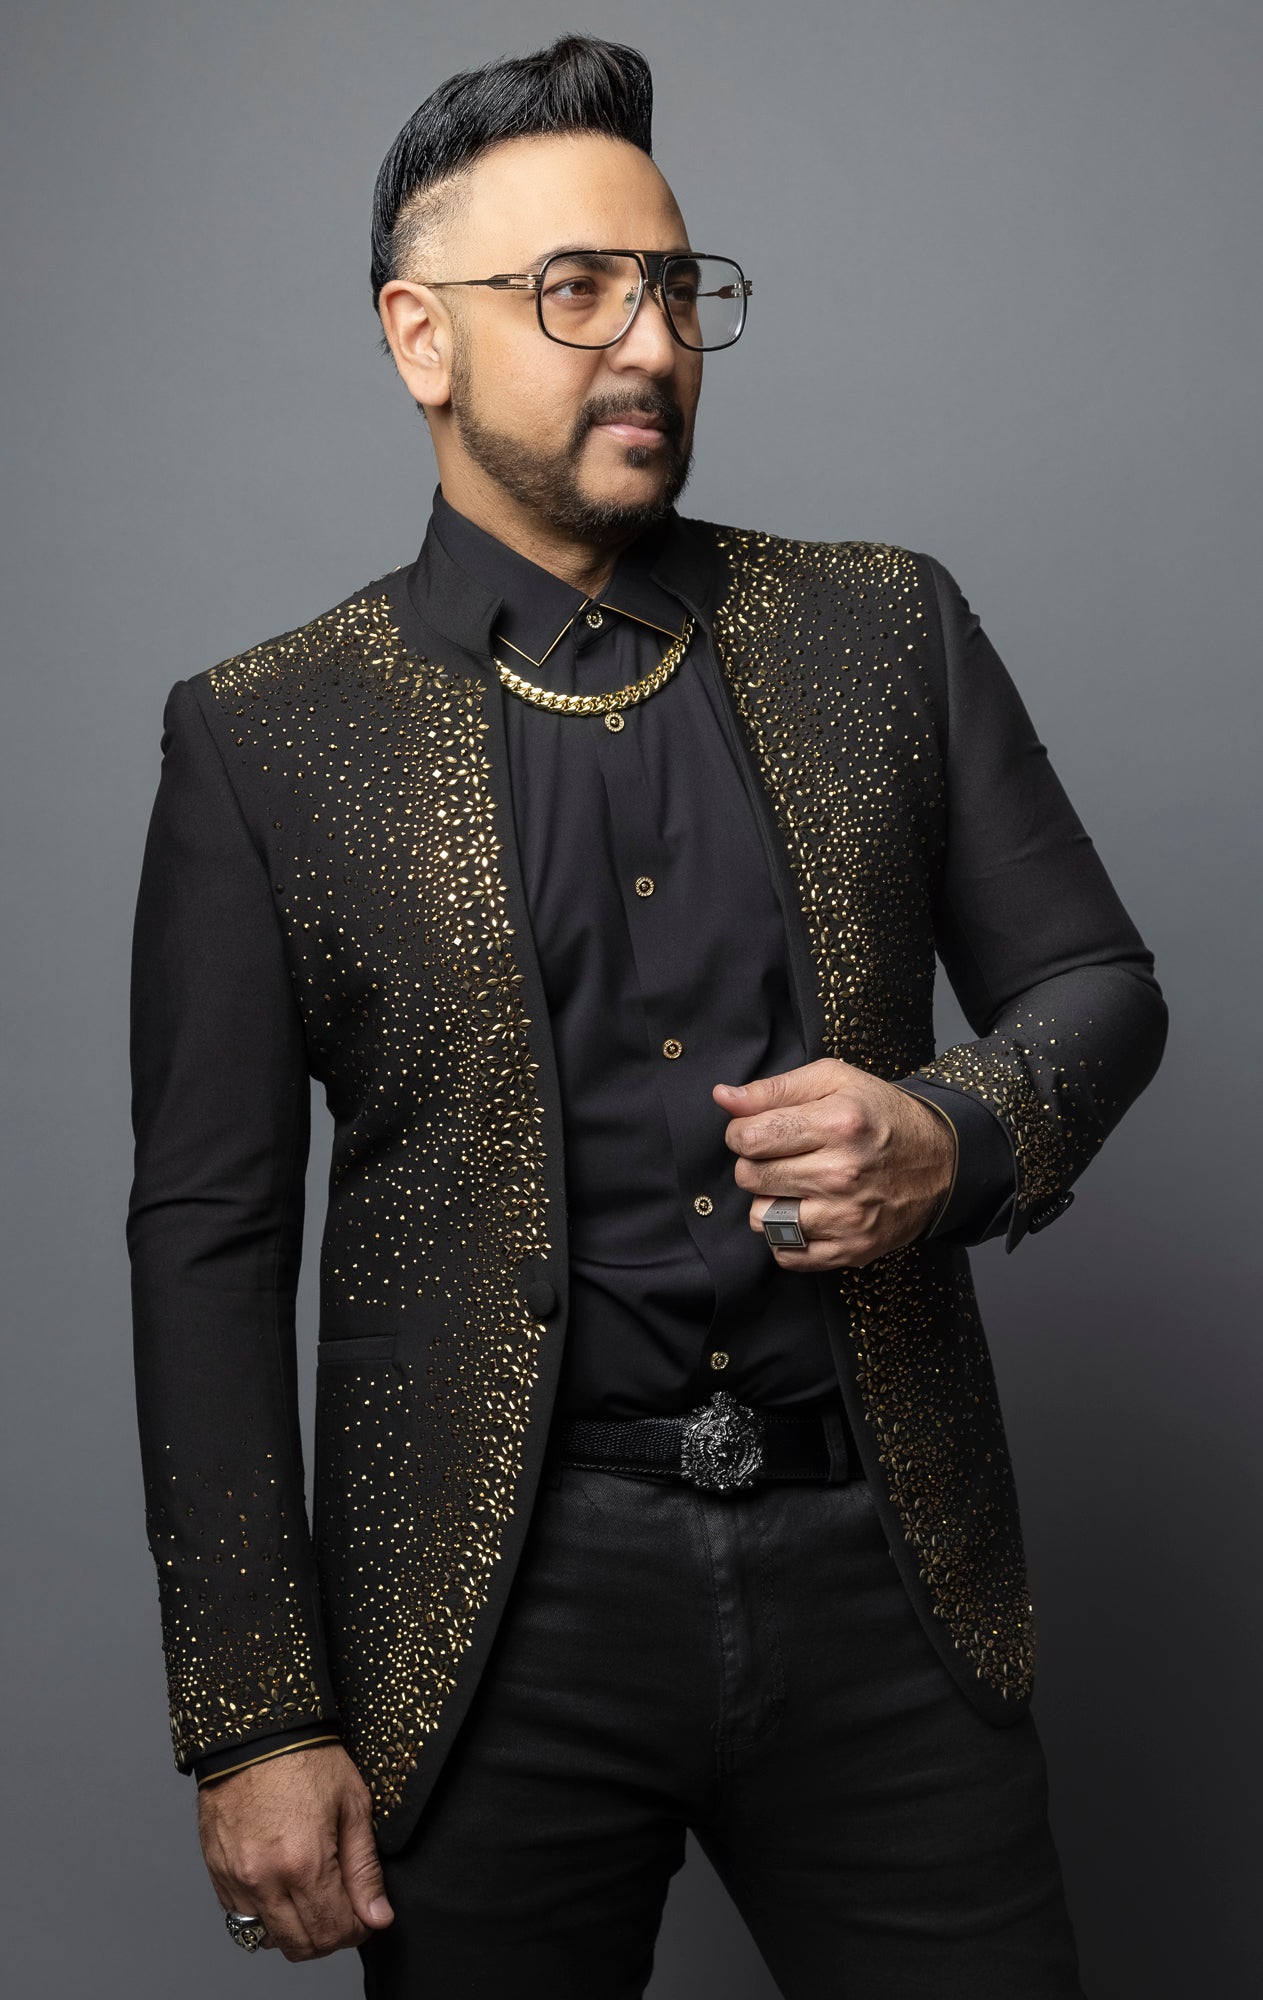 Black blazer featuring a solid color and striking gold rhinestone design, with a band collar